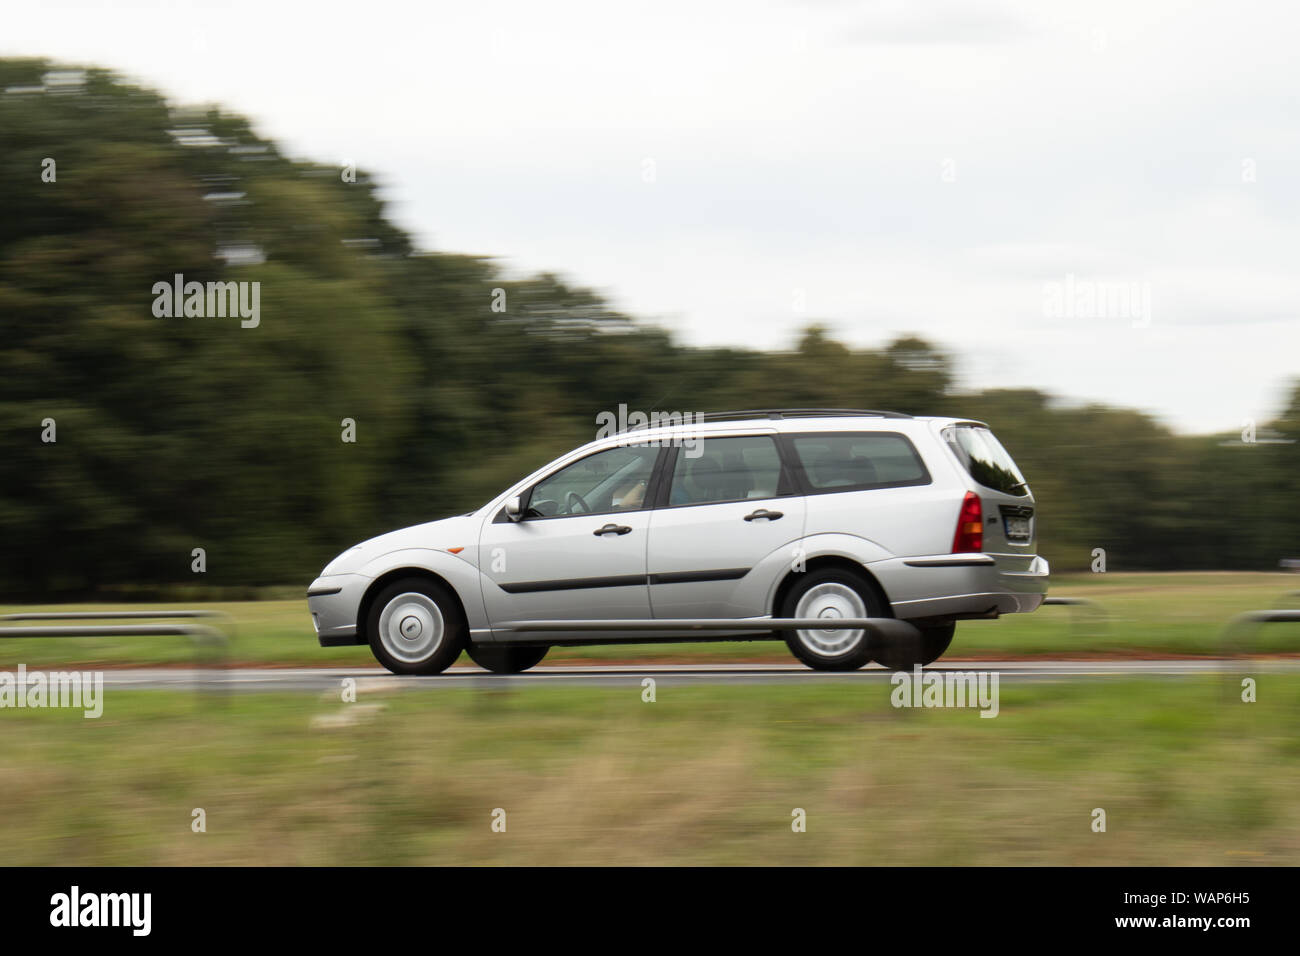 car in motion, blurred background, Ford Focus Stock Photo